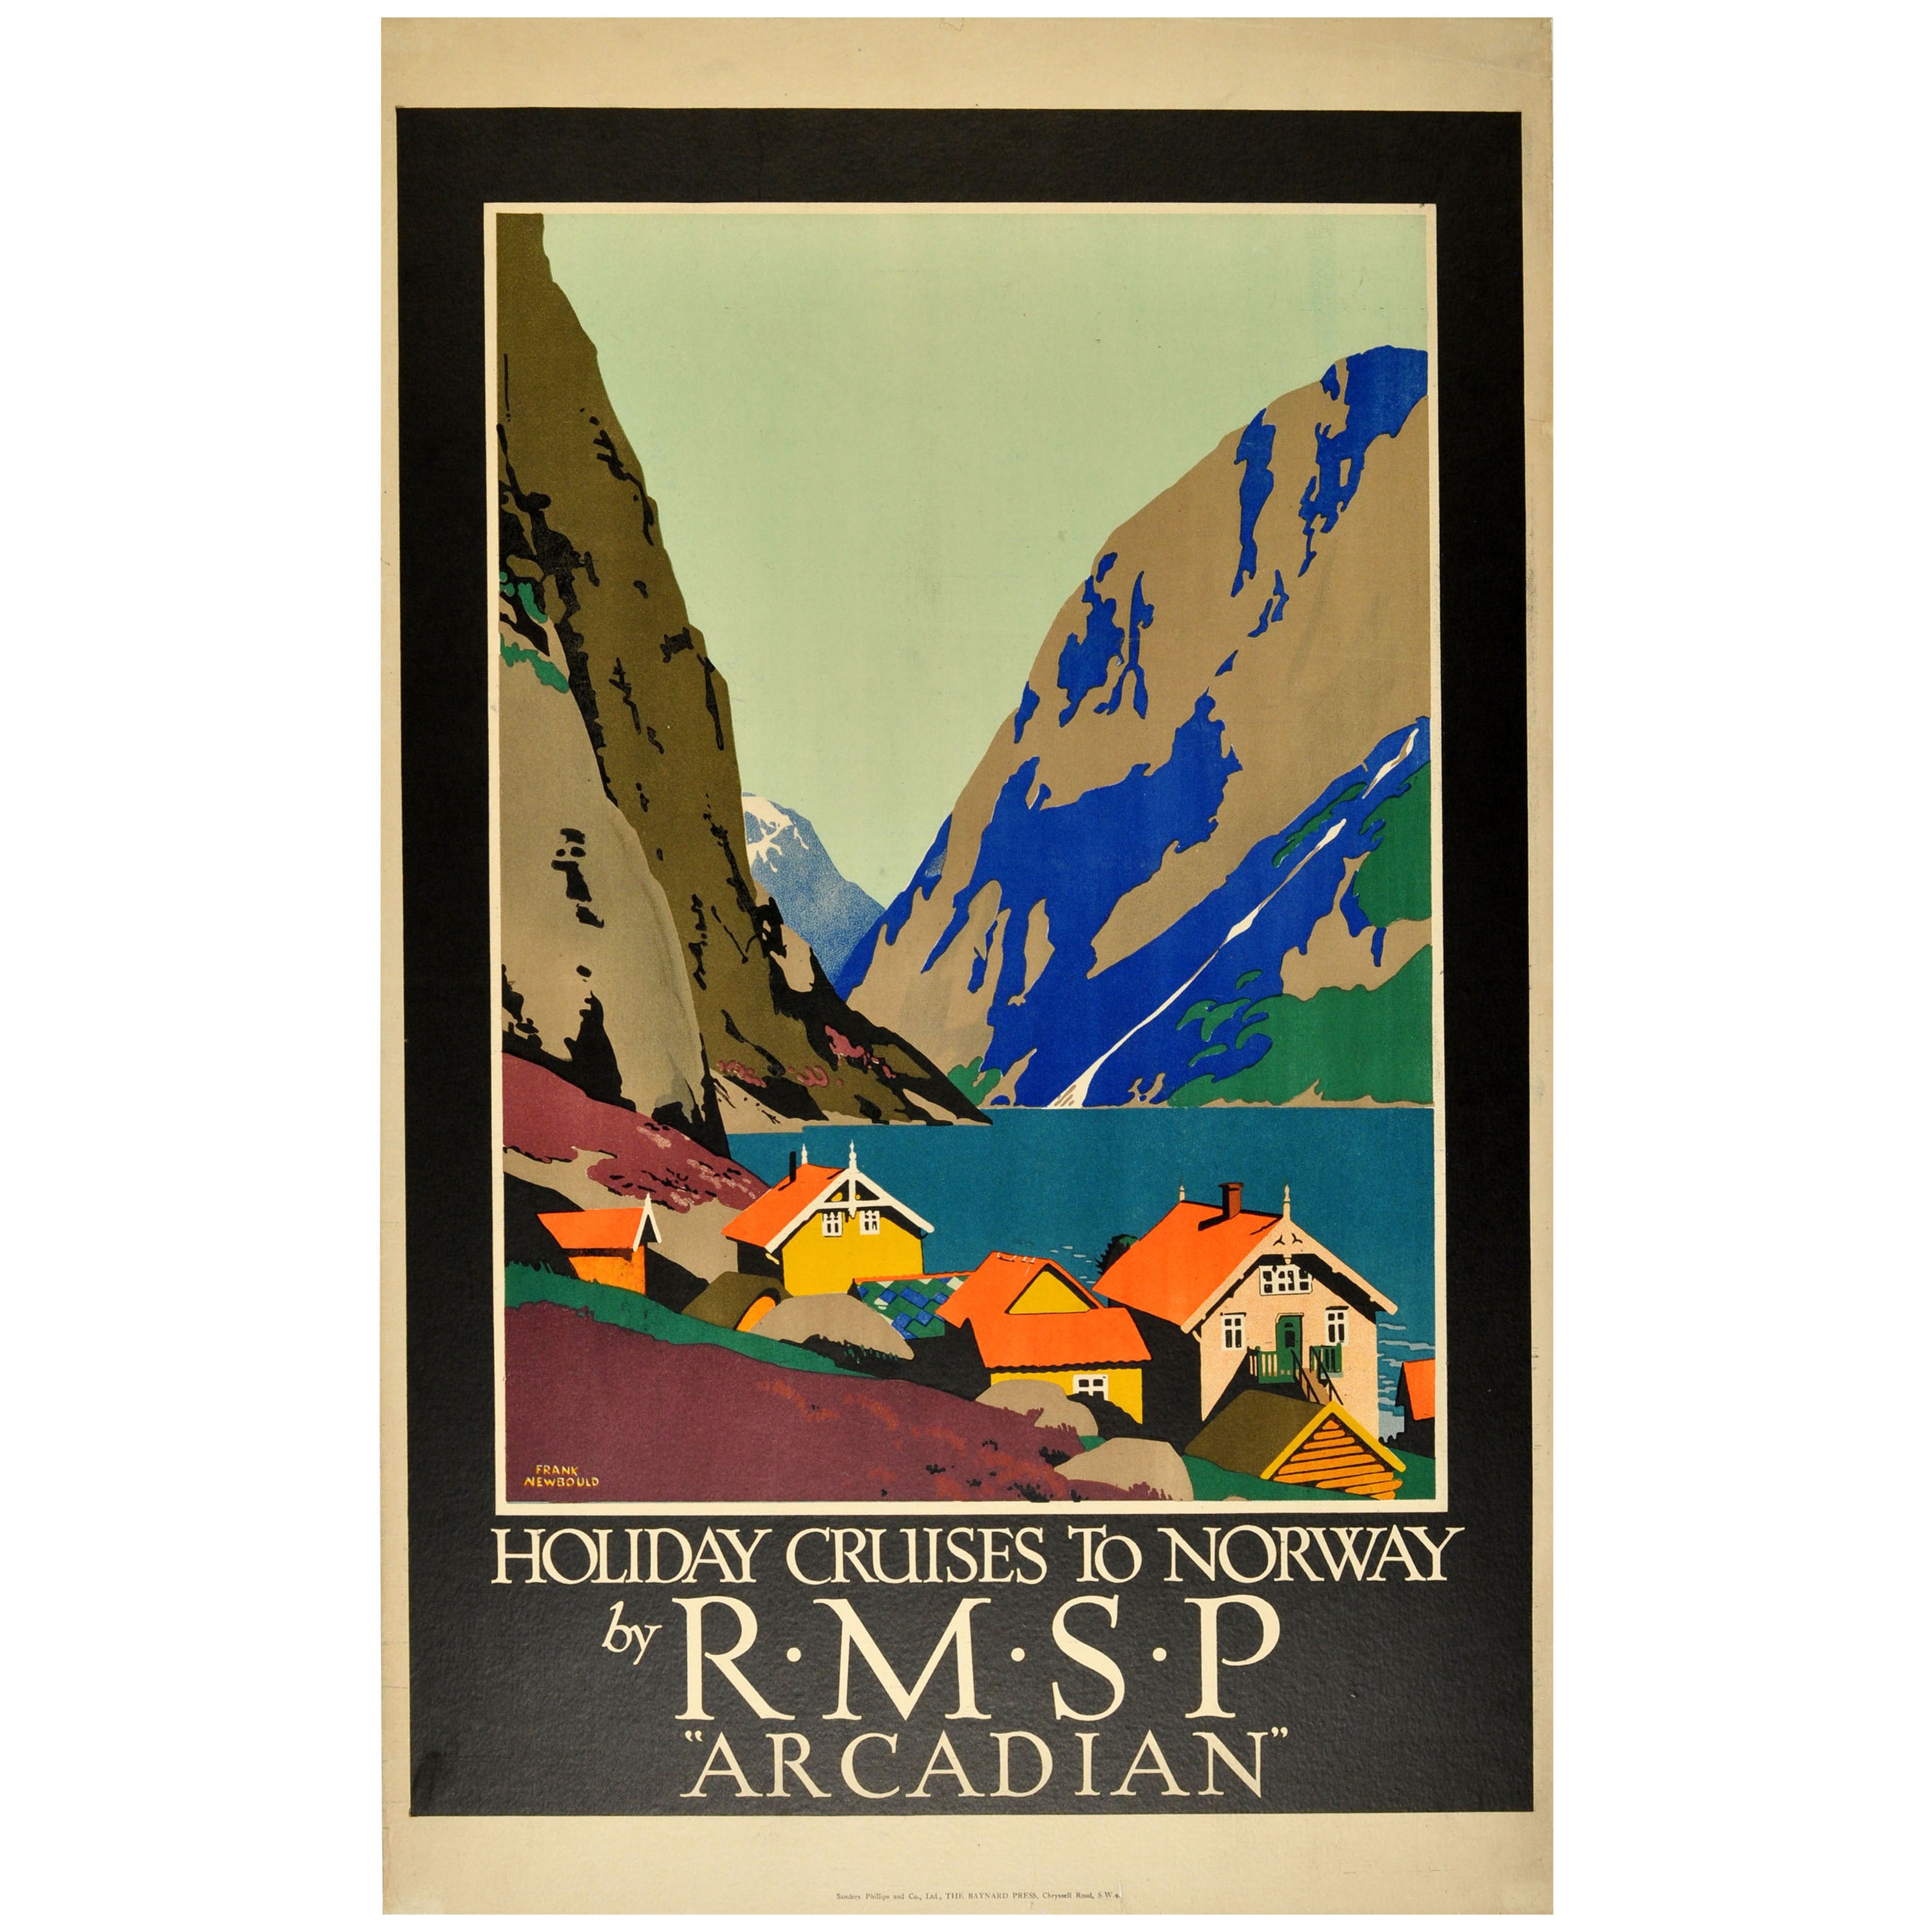 Original Travel Poster by Frank Newbould Advertising Holiday Cruises to Norway